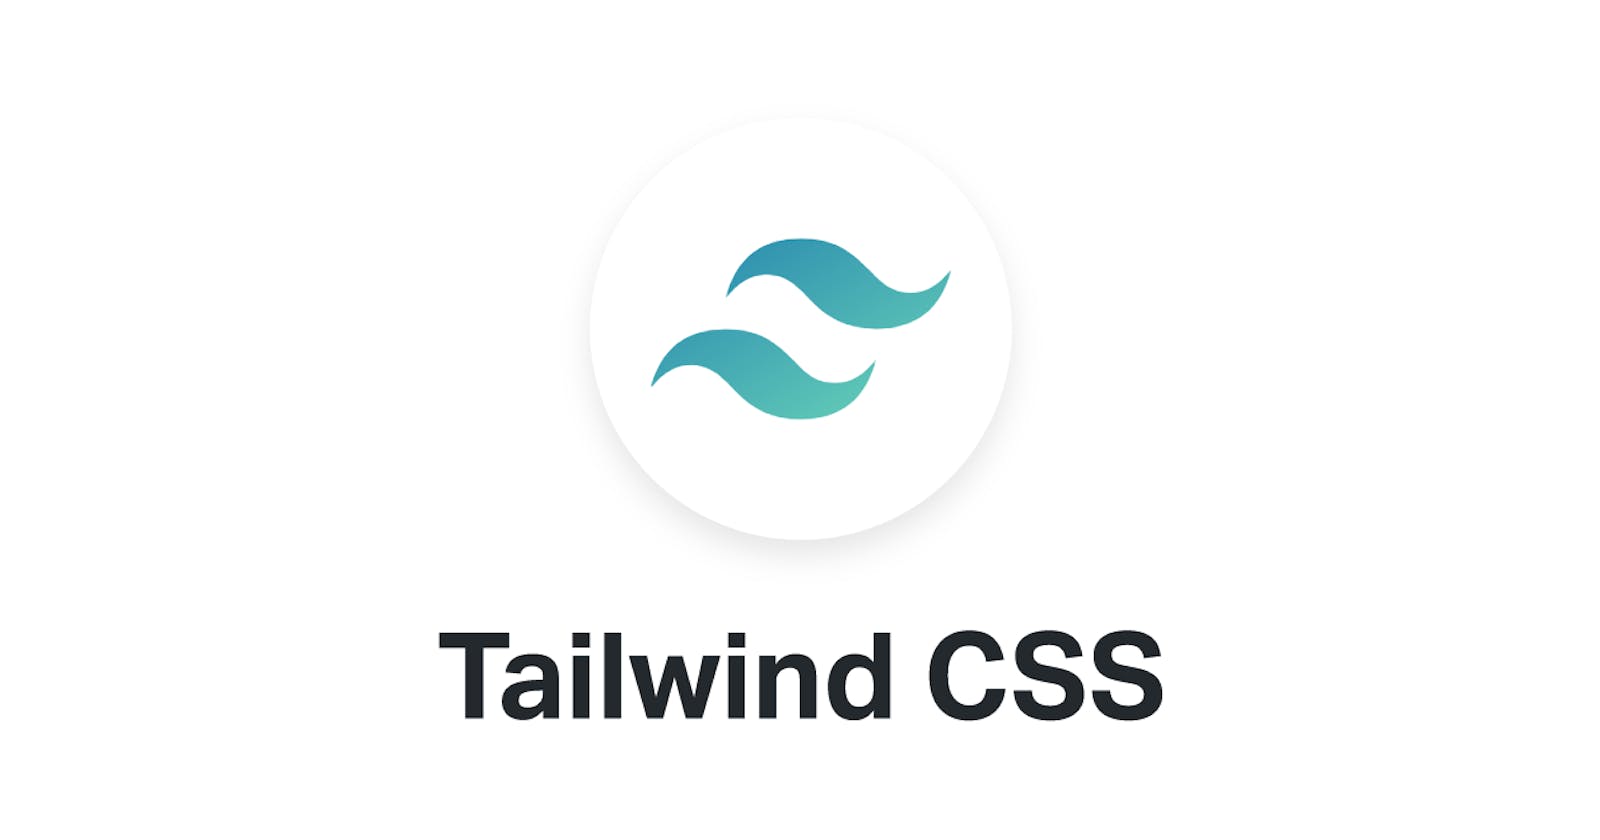 Getting Started with TailwindCSS